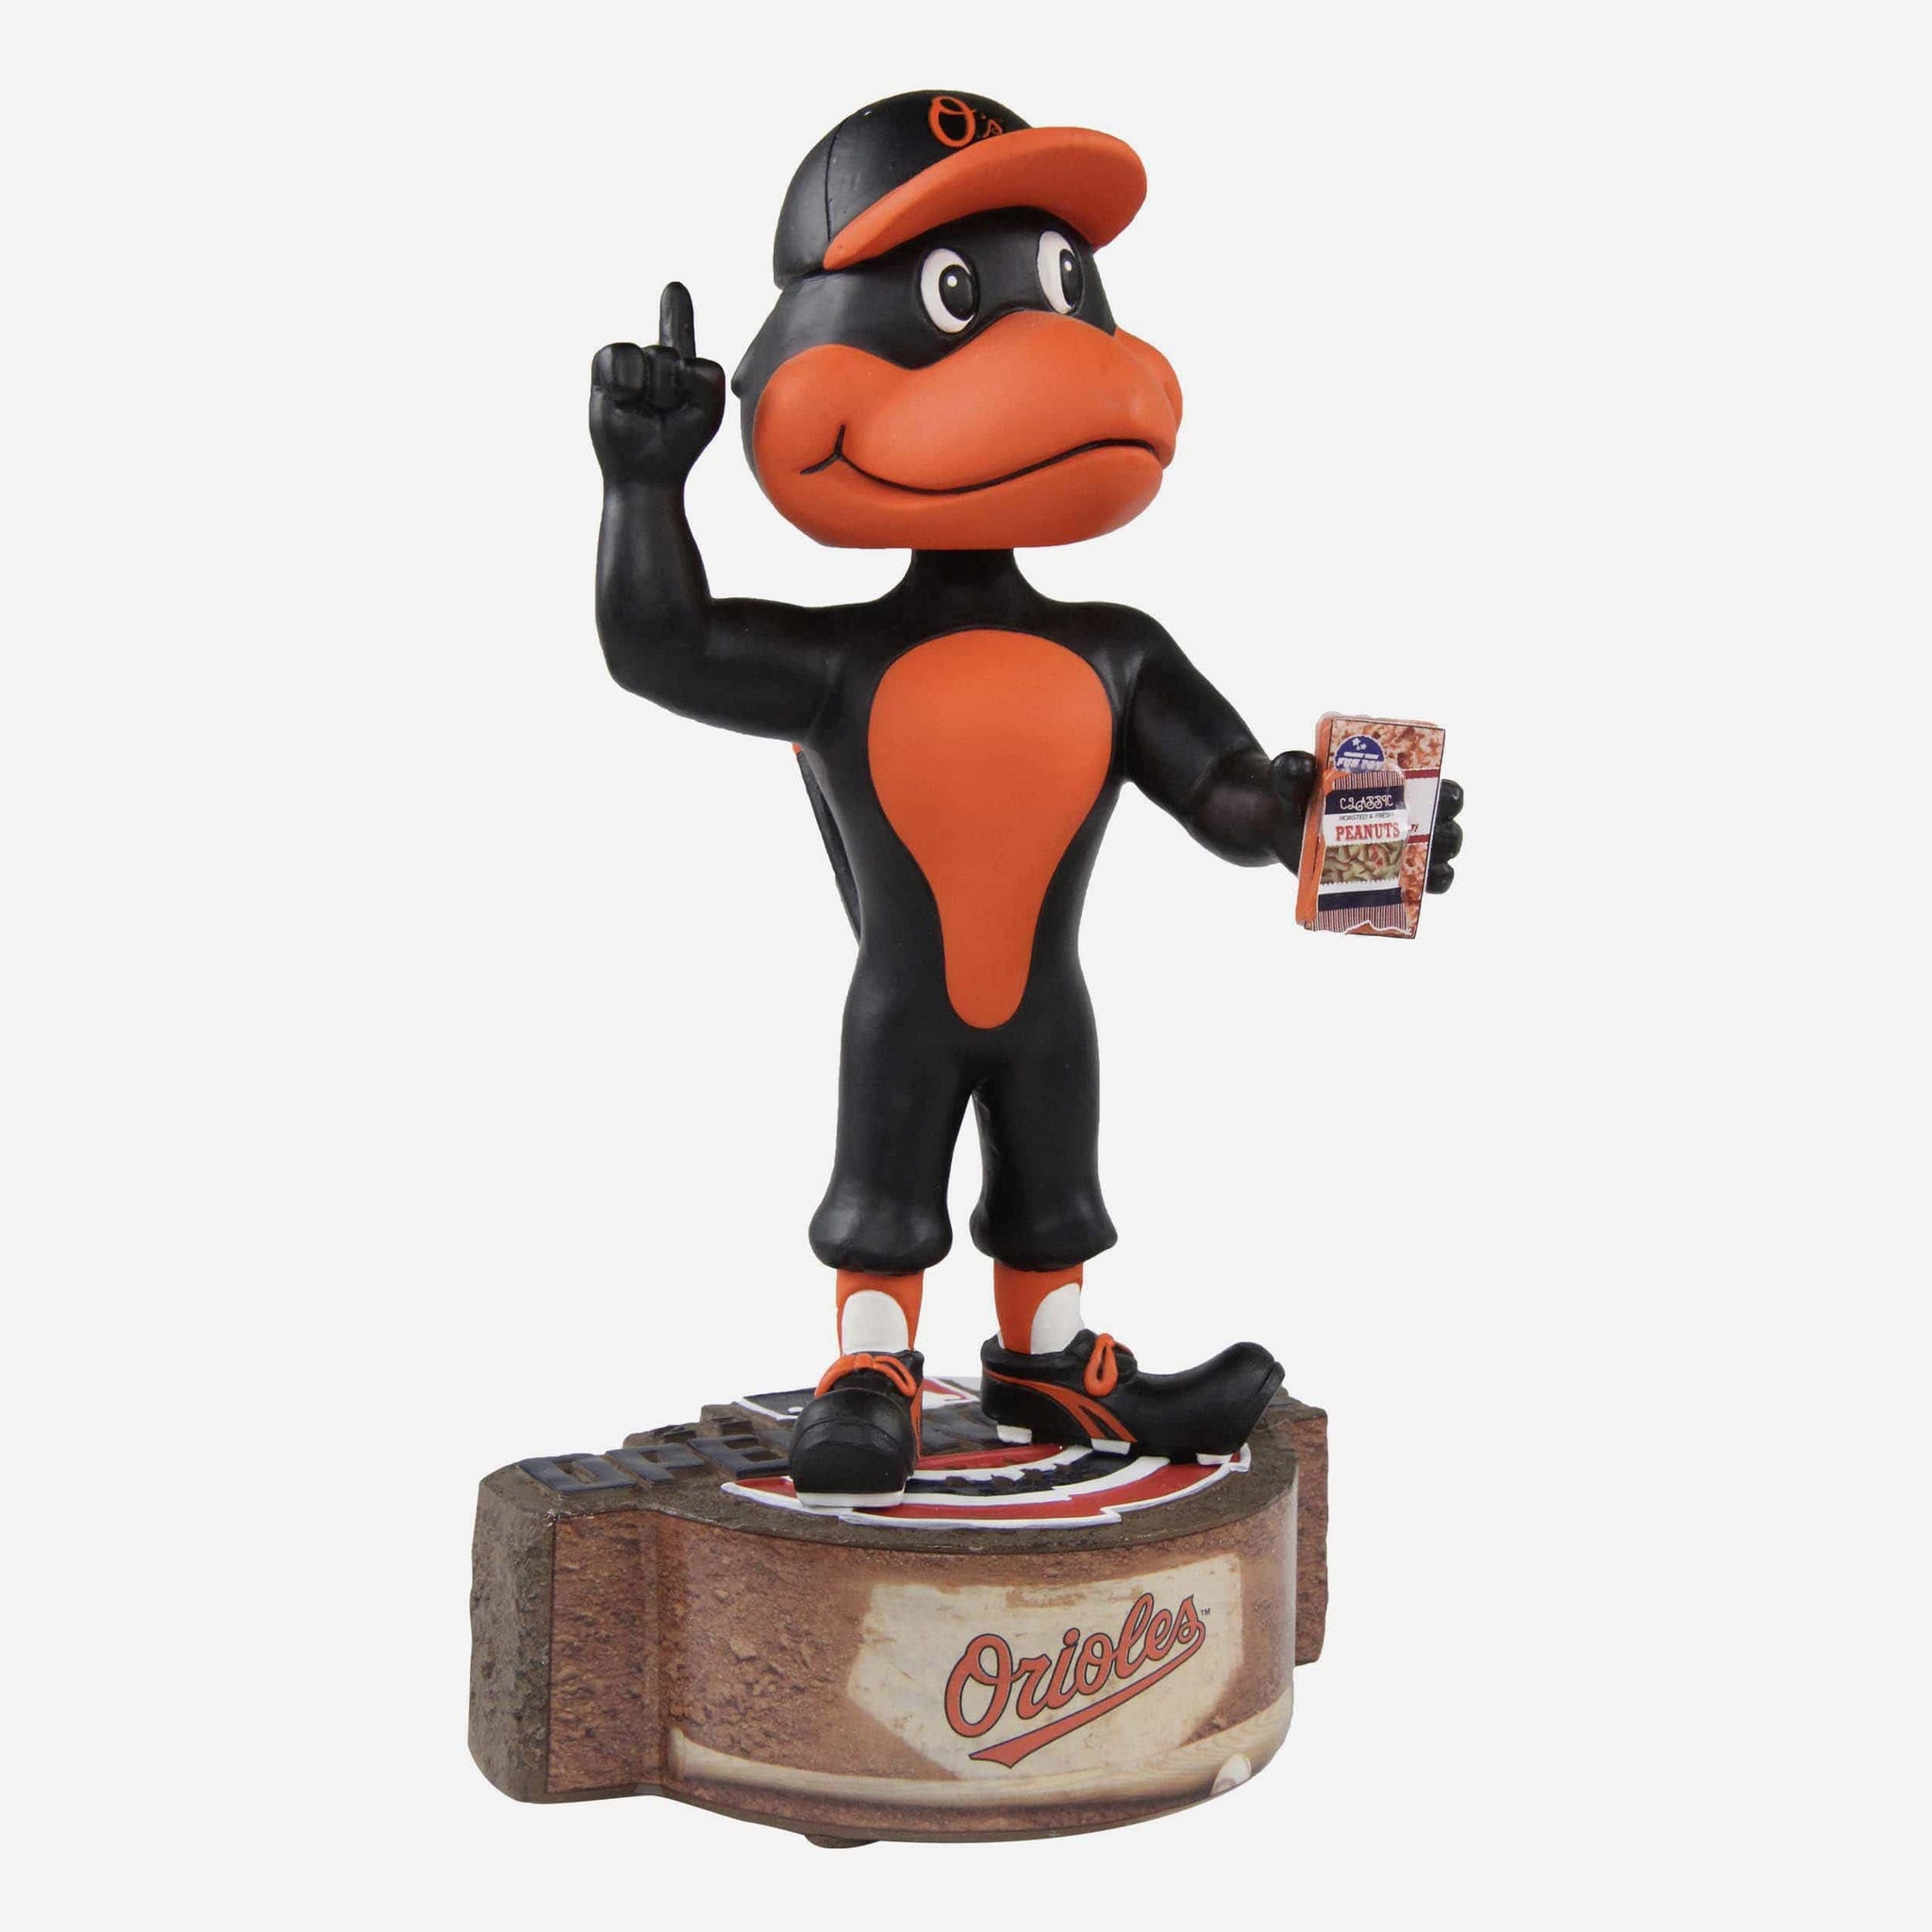 ORIOLES MASCOT THE BIRD, TEAM ISSUED 4 1/4 x 6 PHOTO, BALTIMORE !